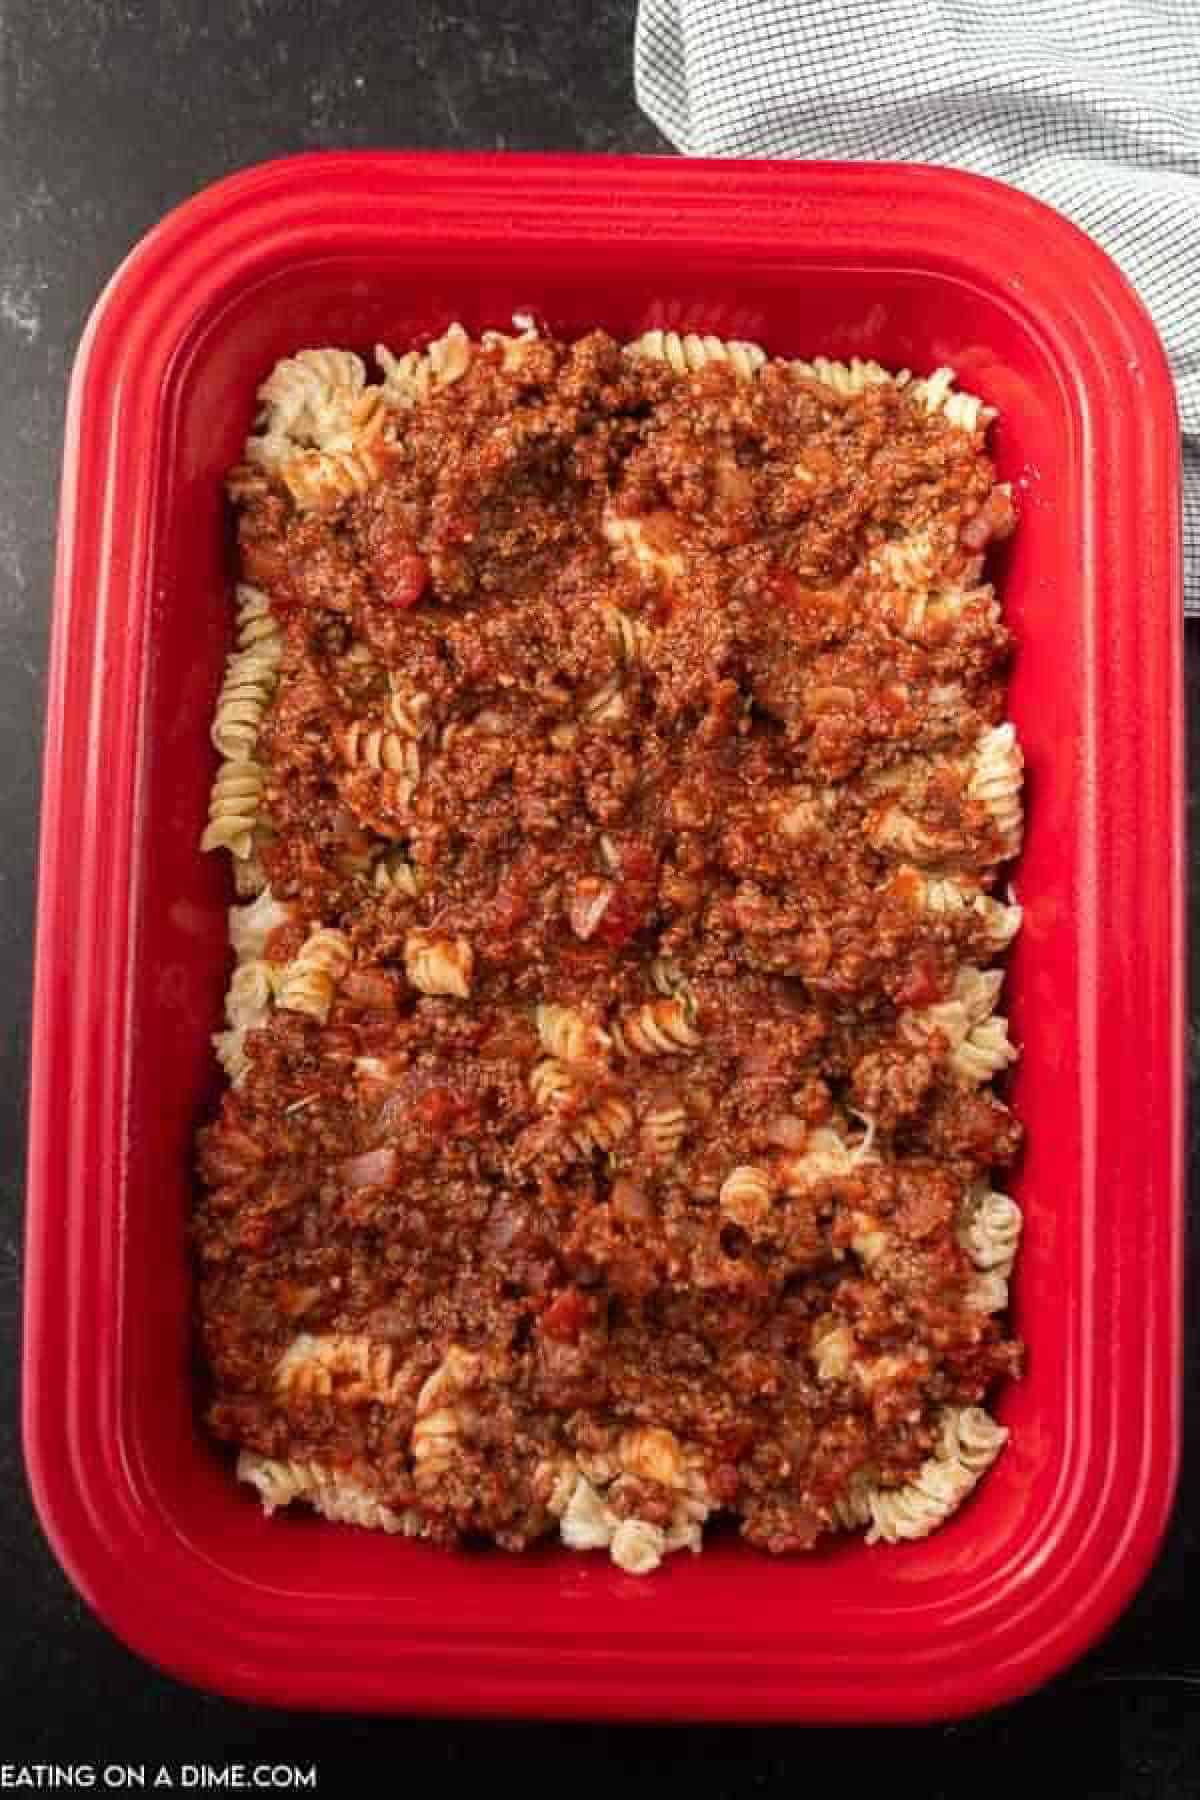 Meat sauce topped with pasta in the red casserole dish